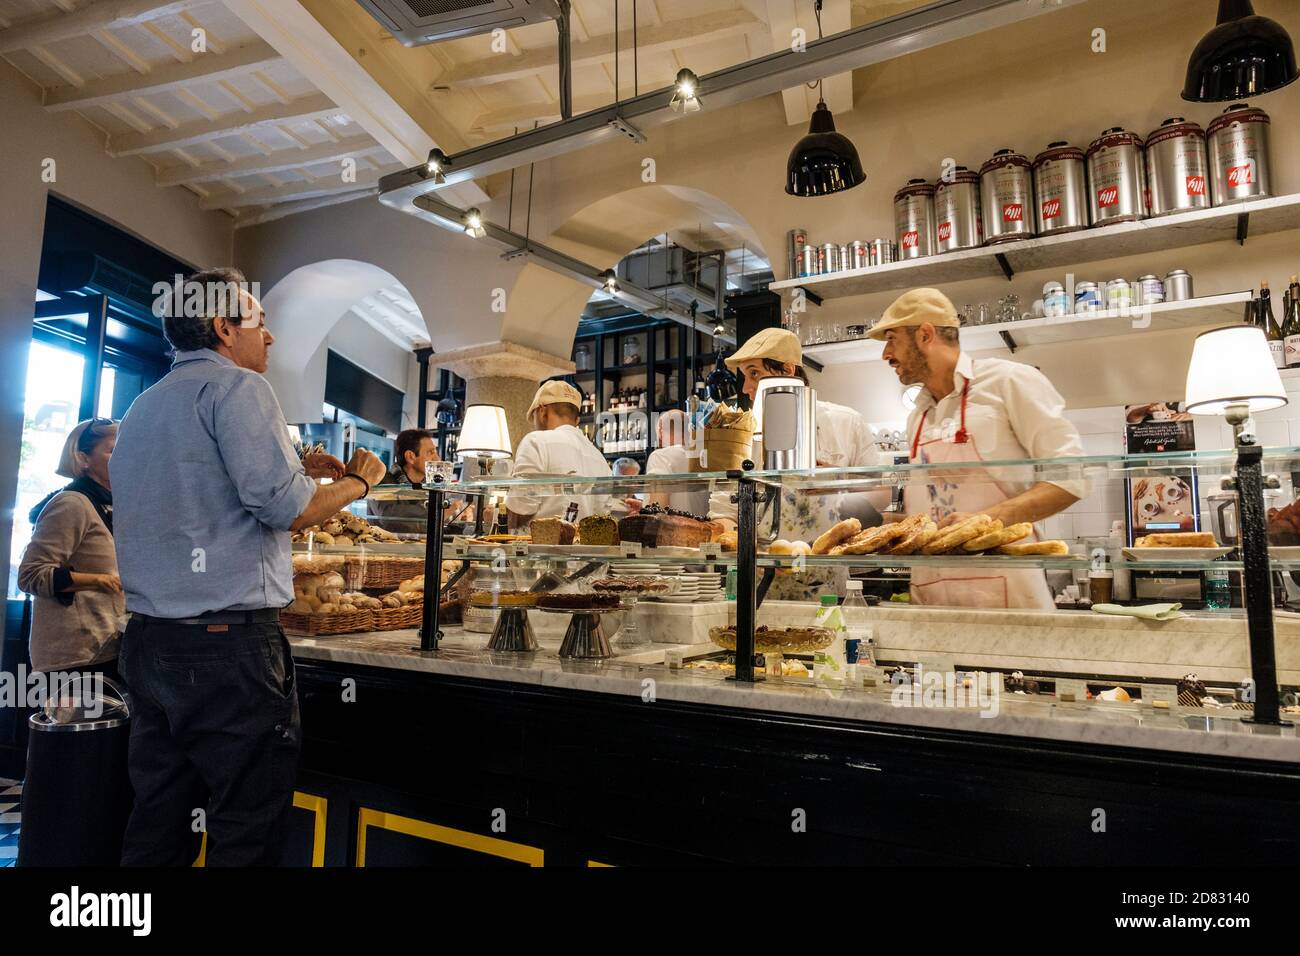 Customers ordering food, Forno Monteforte Pasticceria food counter, Rome, Italy. Stock Photo